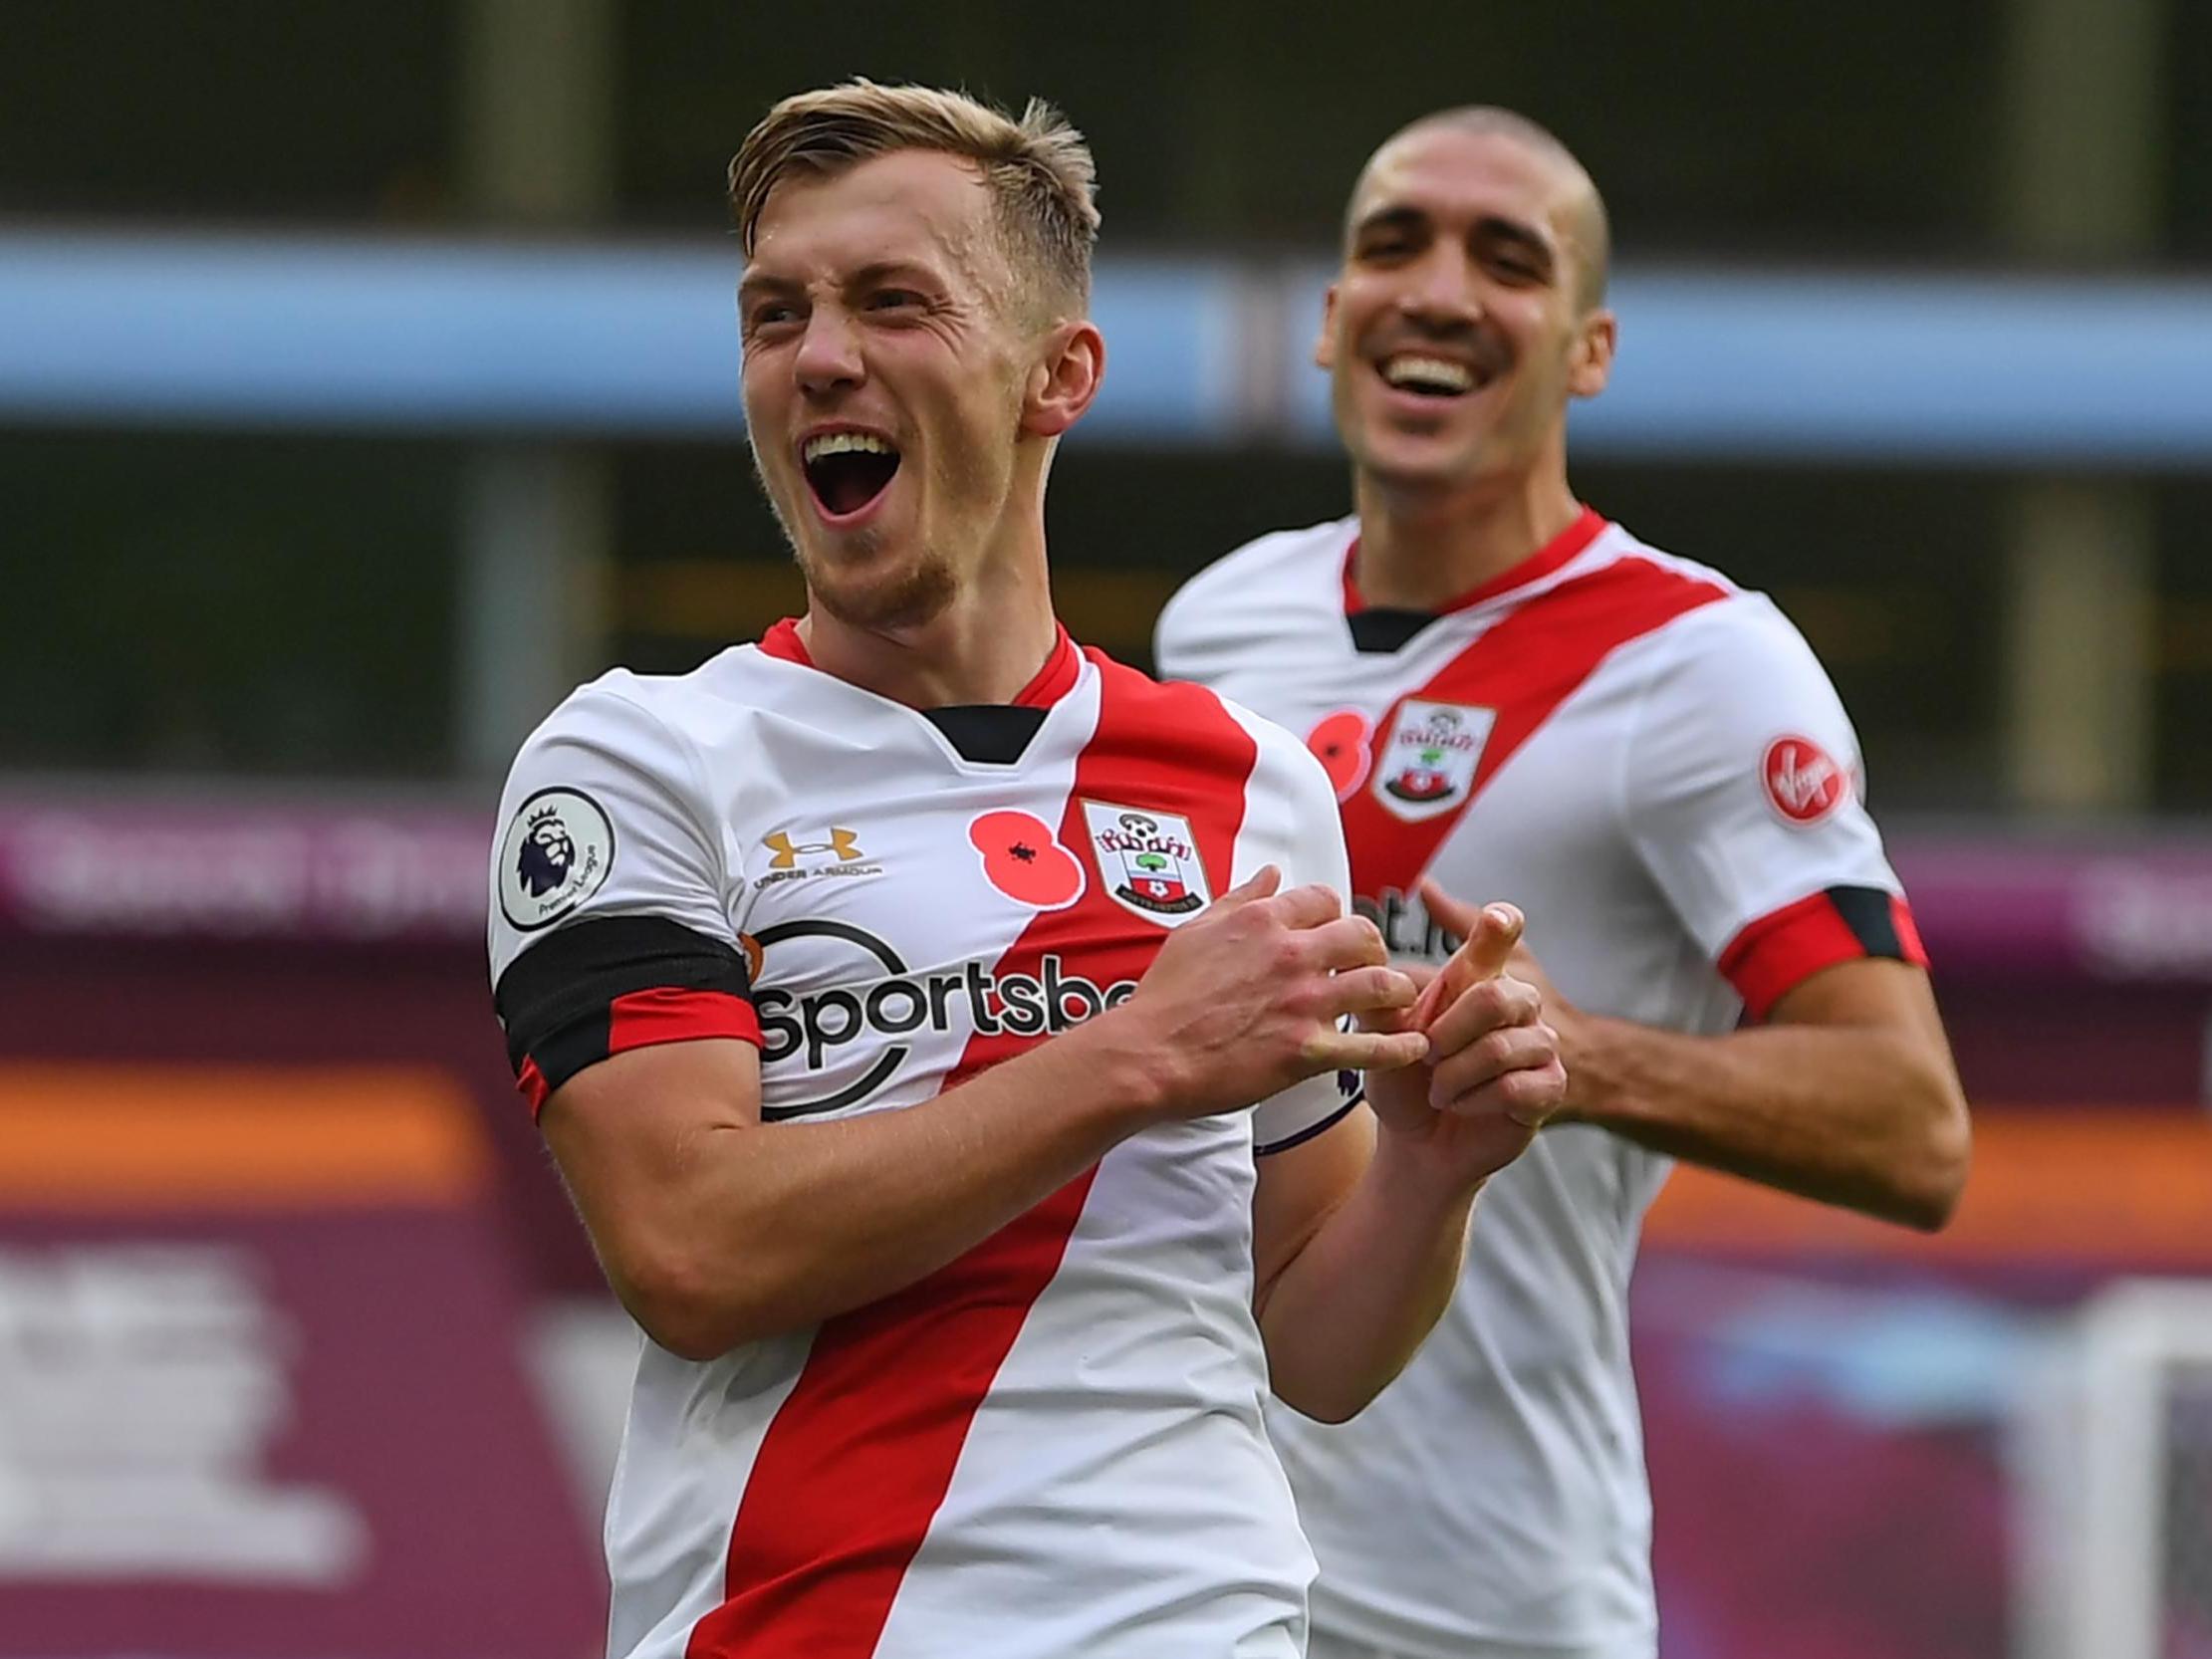 James Ward-Prowse netted a brace for Southampton as they beat Aston Villa